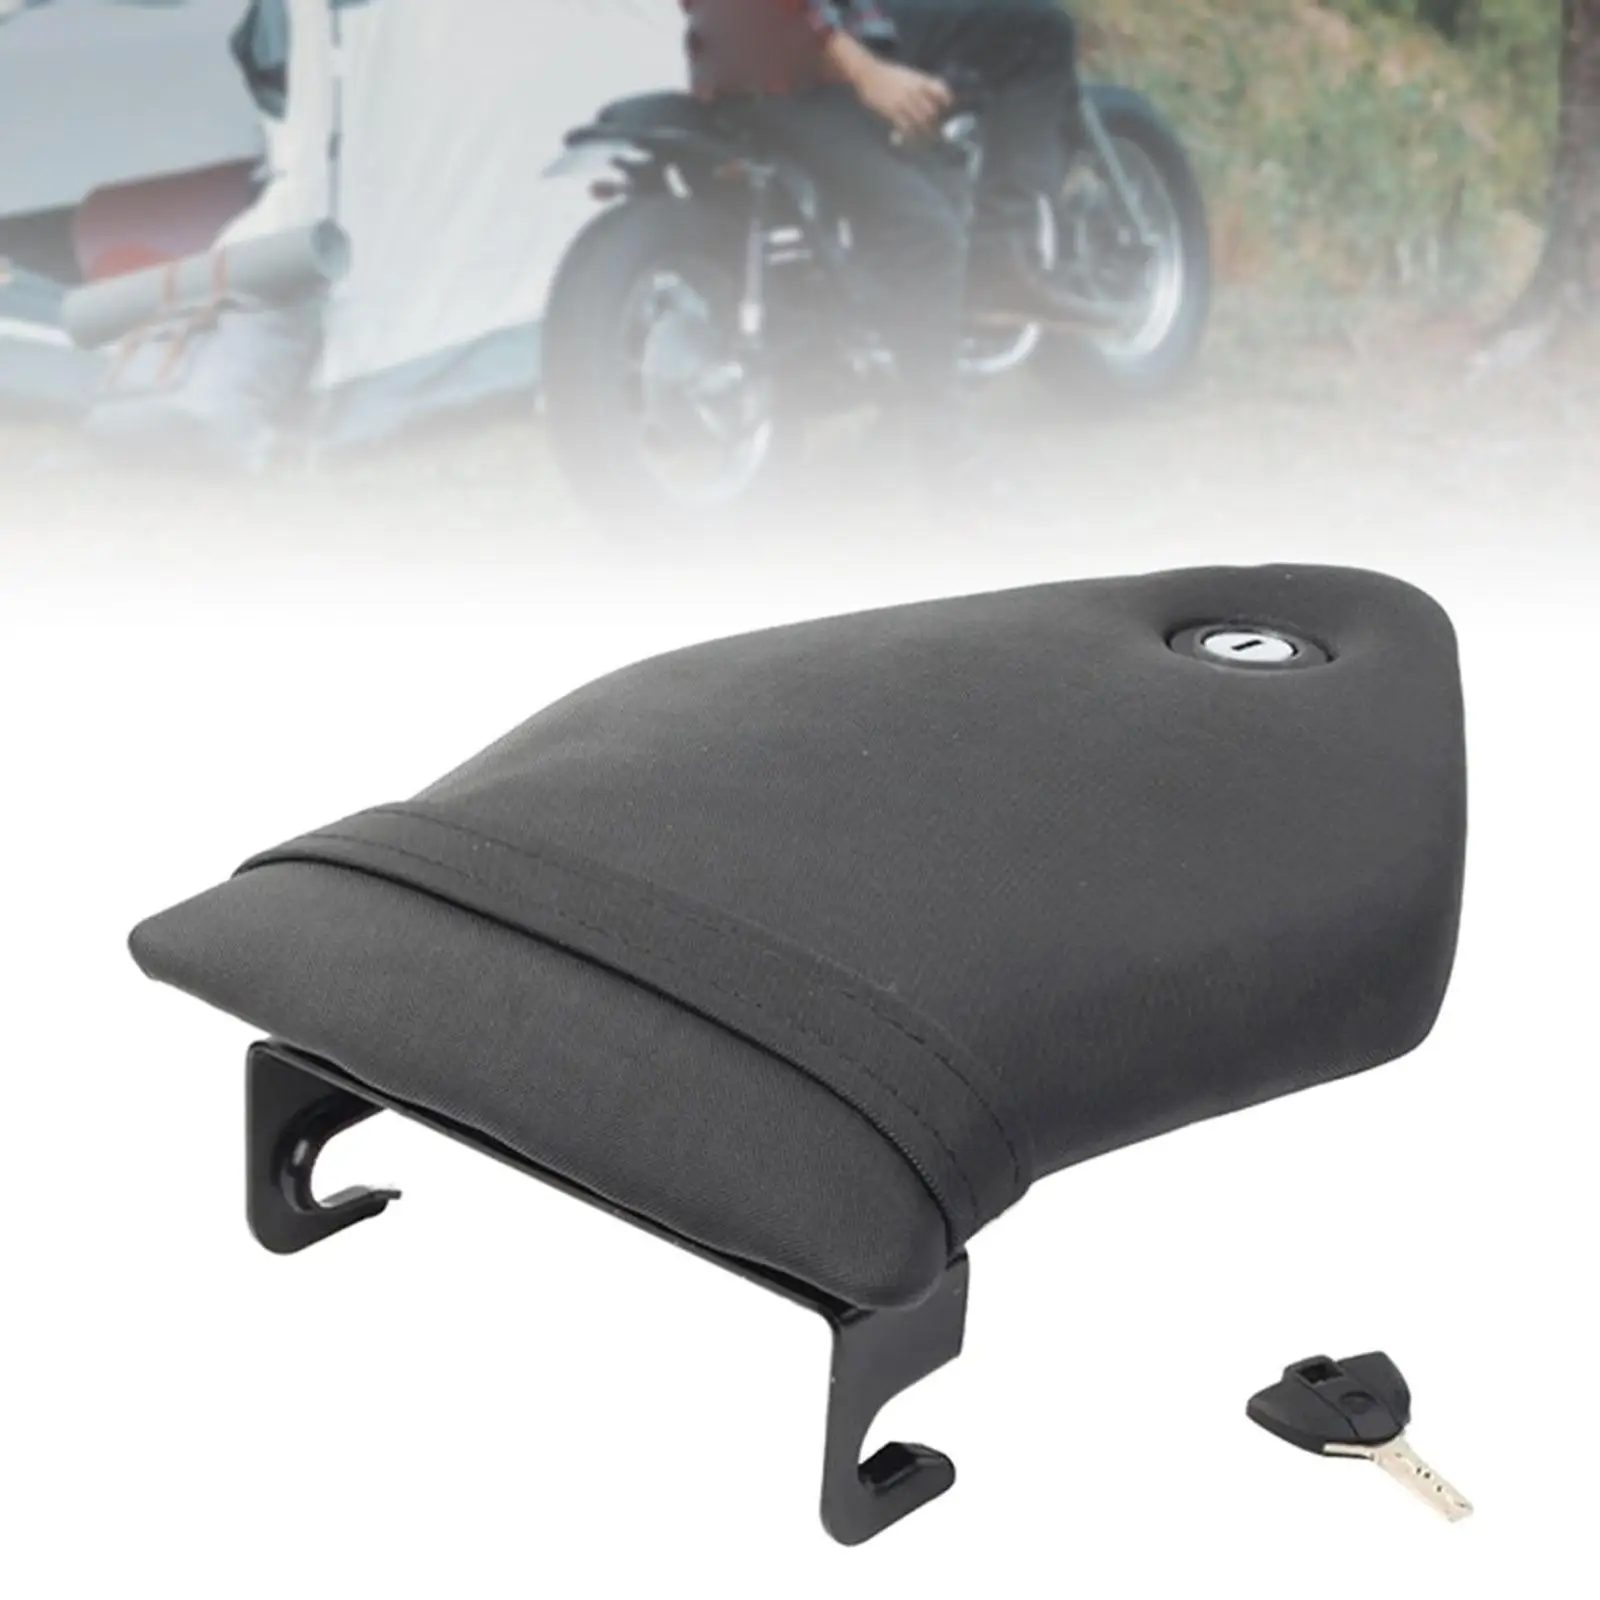 Rear Passenger Cushion with Mounting Bracket Accessories PU Leather for S1000 Rr 2009-2017 Simple Installation Spare Parts